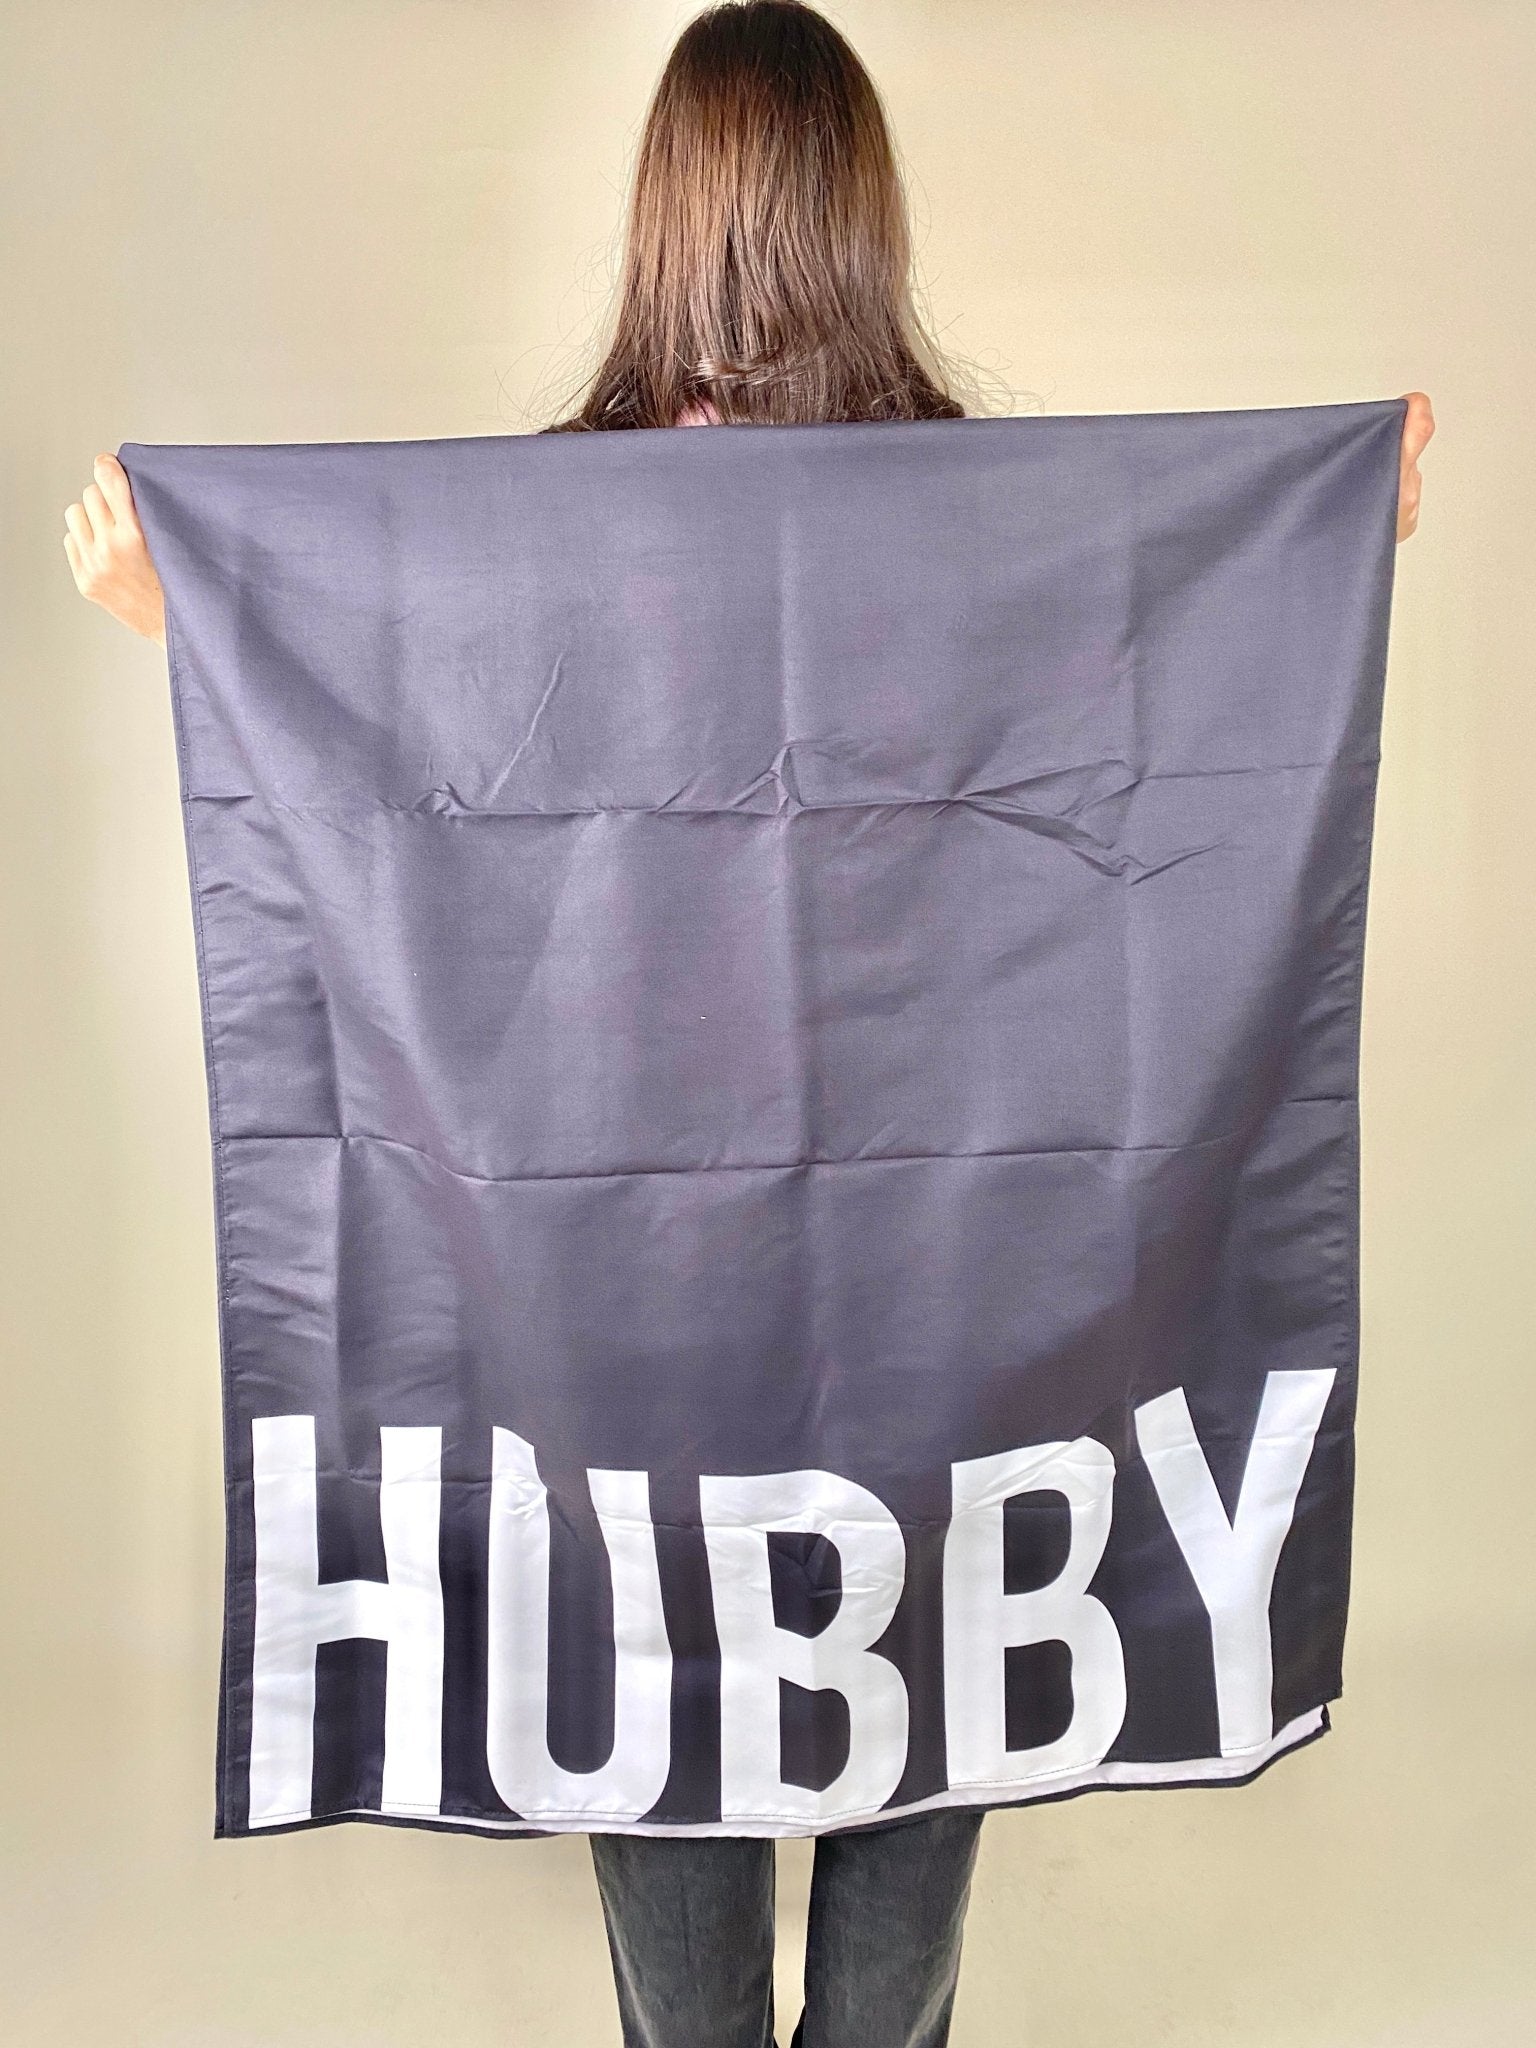 Hubby quick dry oversized beach towel black - Stylish Beach Towels -  Cute Bridal Collection at Lush Fashion Lounge Boutique in Oklahoma City